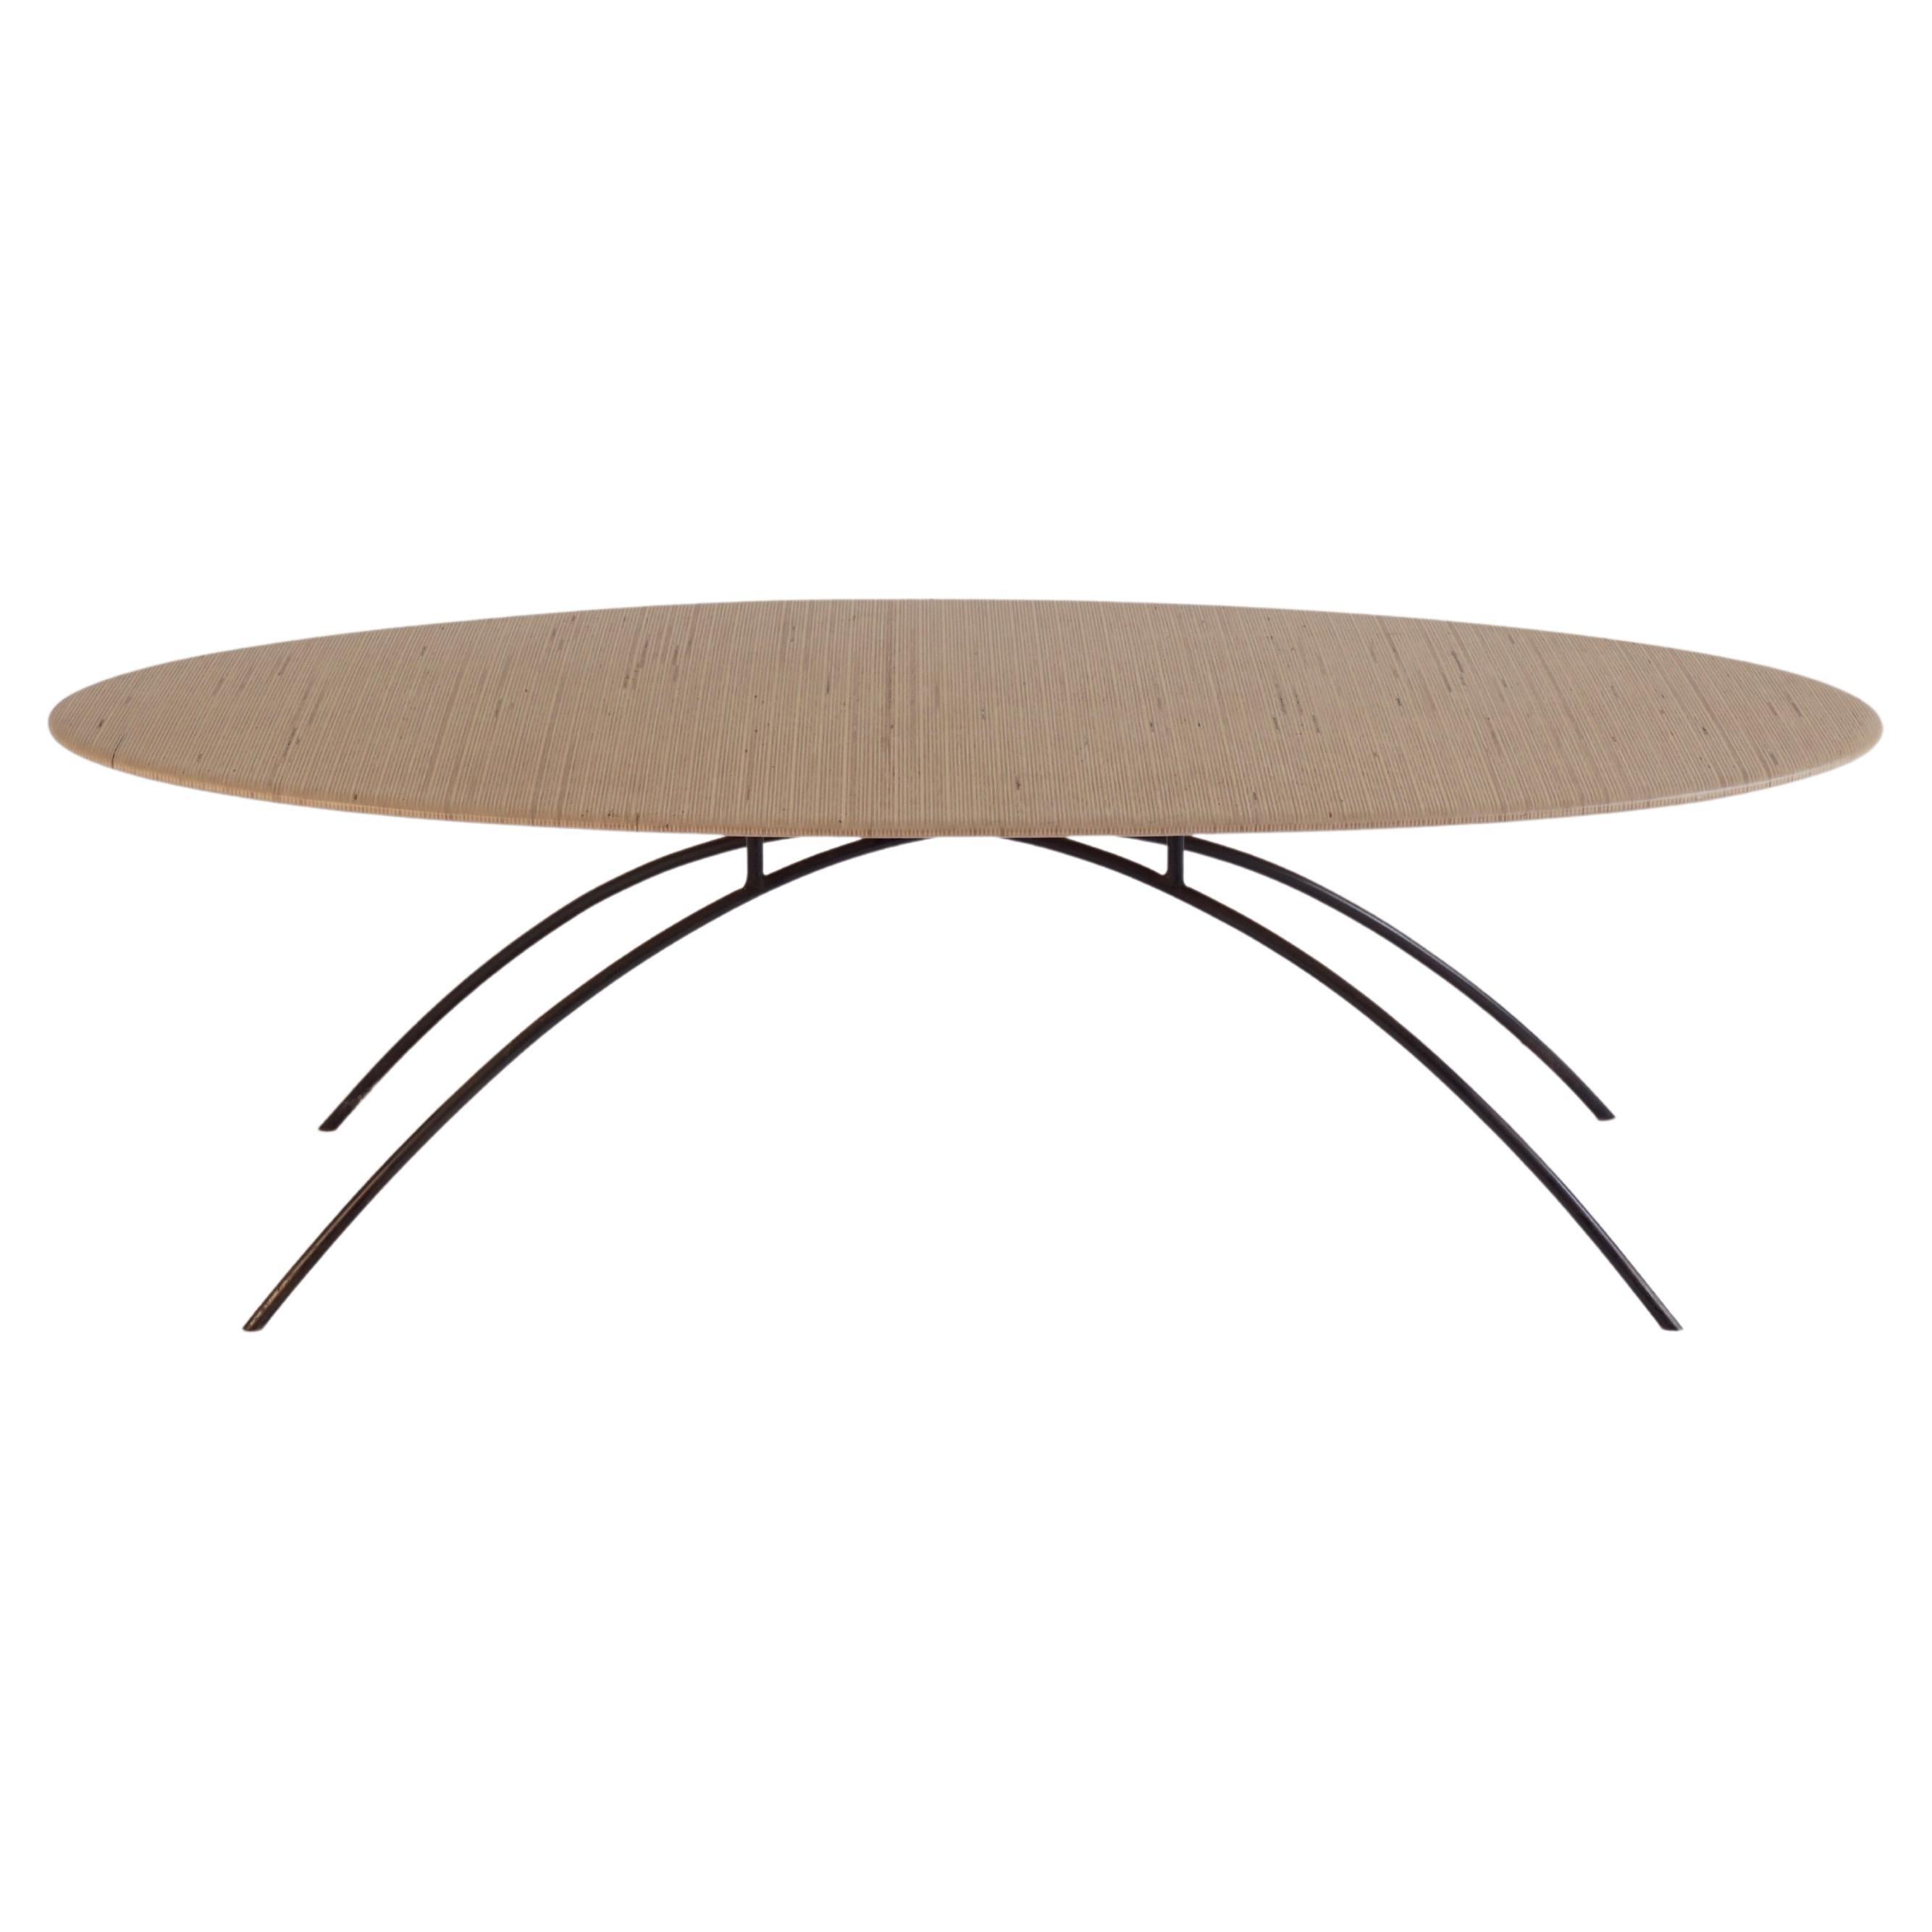 Sculpted Oval Coffee Table, Laminated Finnland Plywood